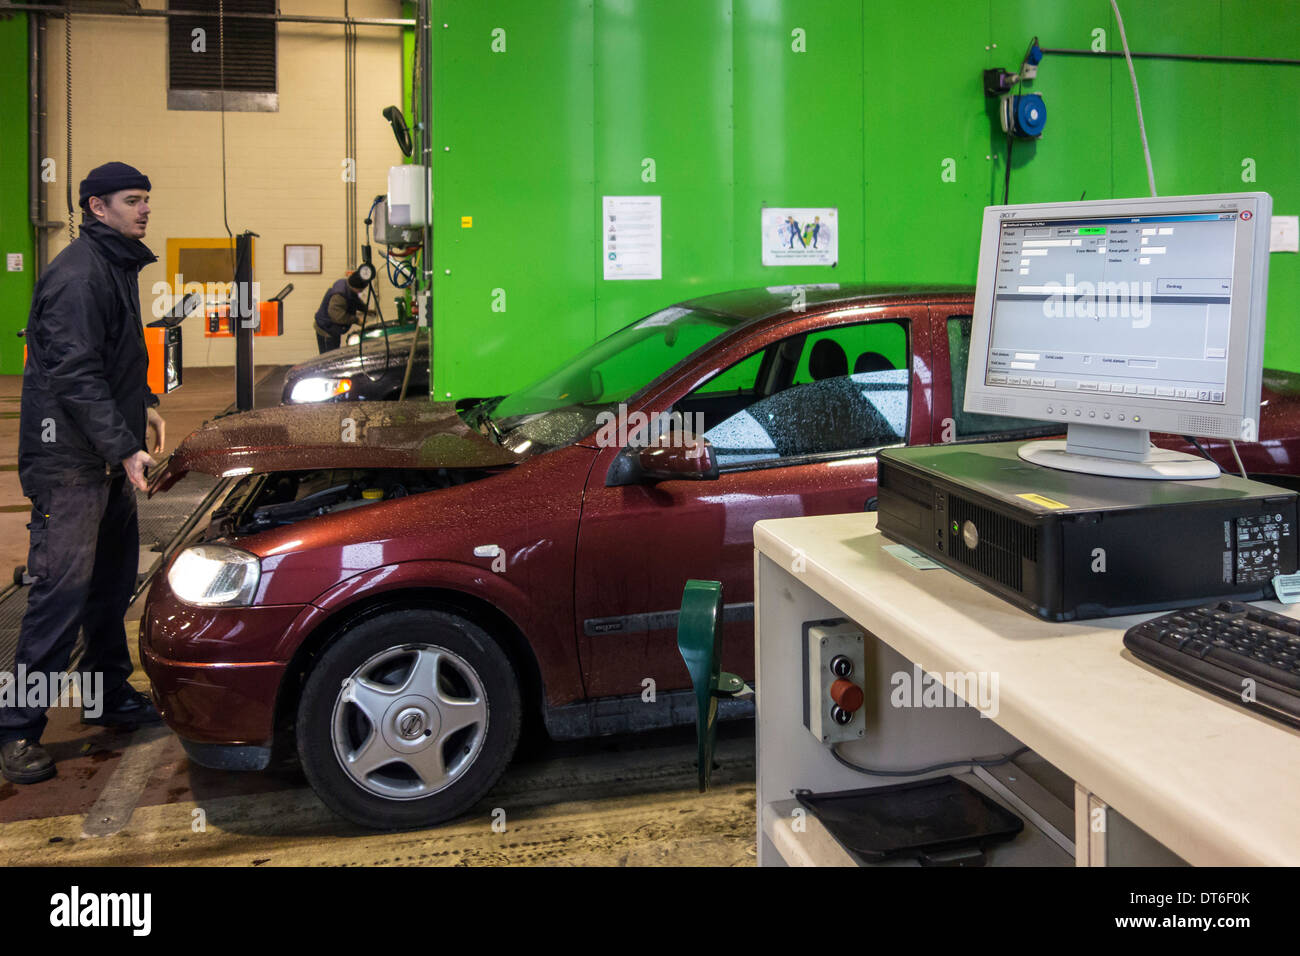 Inspector examining car in MOT testing centre for a yearly motor vehicle inspection Stock Photo